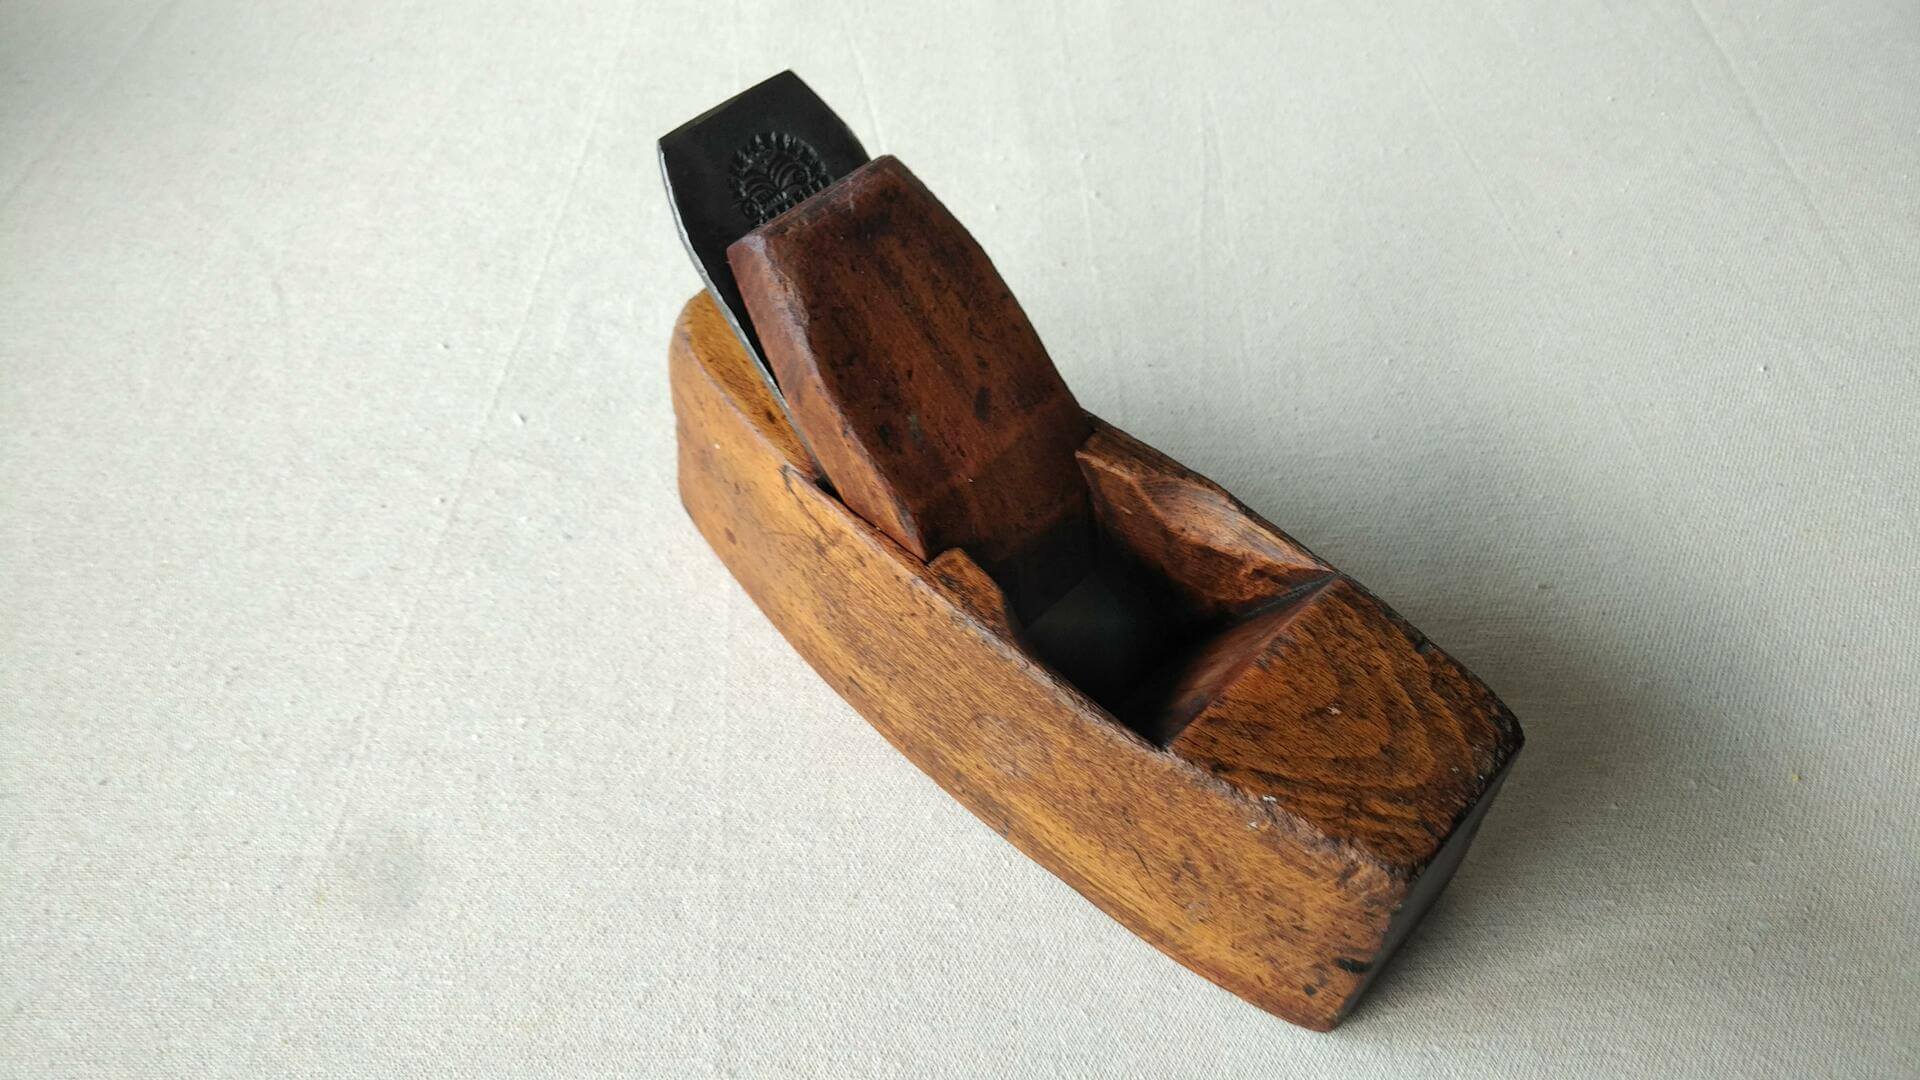 Vintage coffin style smoothing wood plane w rare overstamped Butcher Warranted Cast Steel plane. Antique collectible woodworking and cabinet maker edge tool